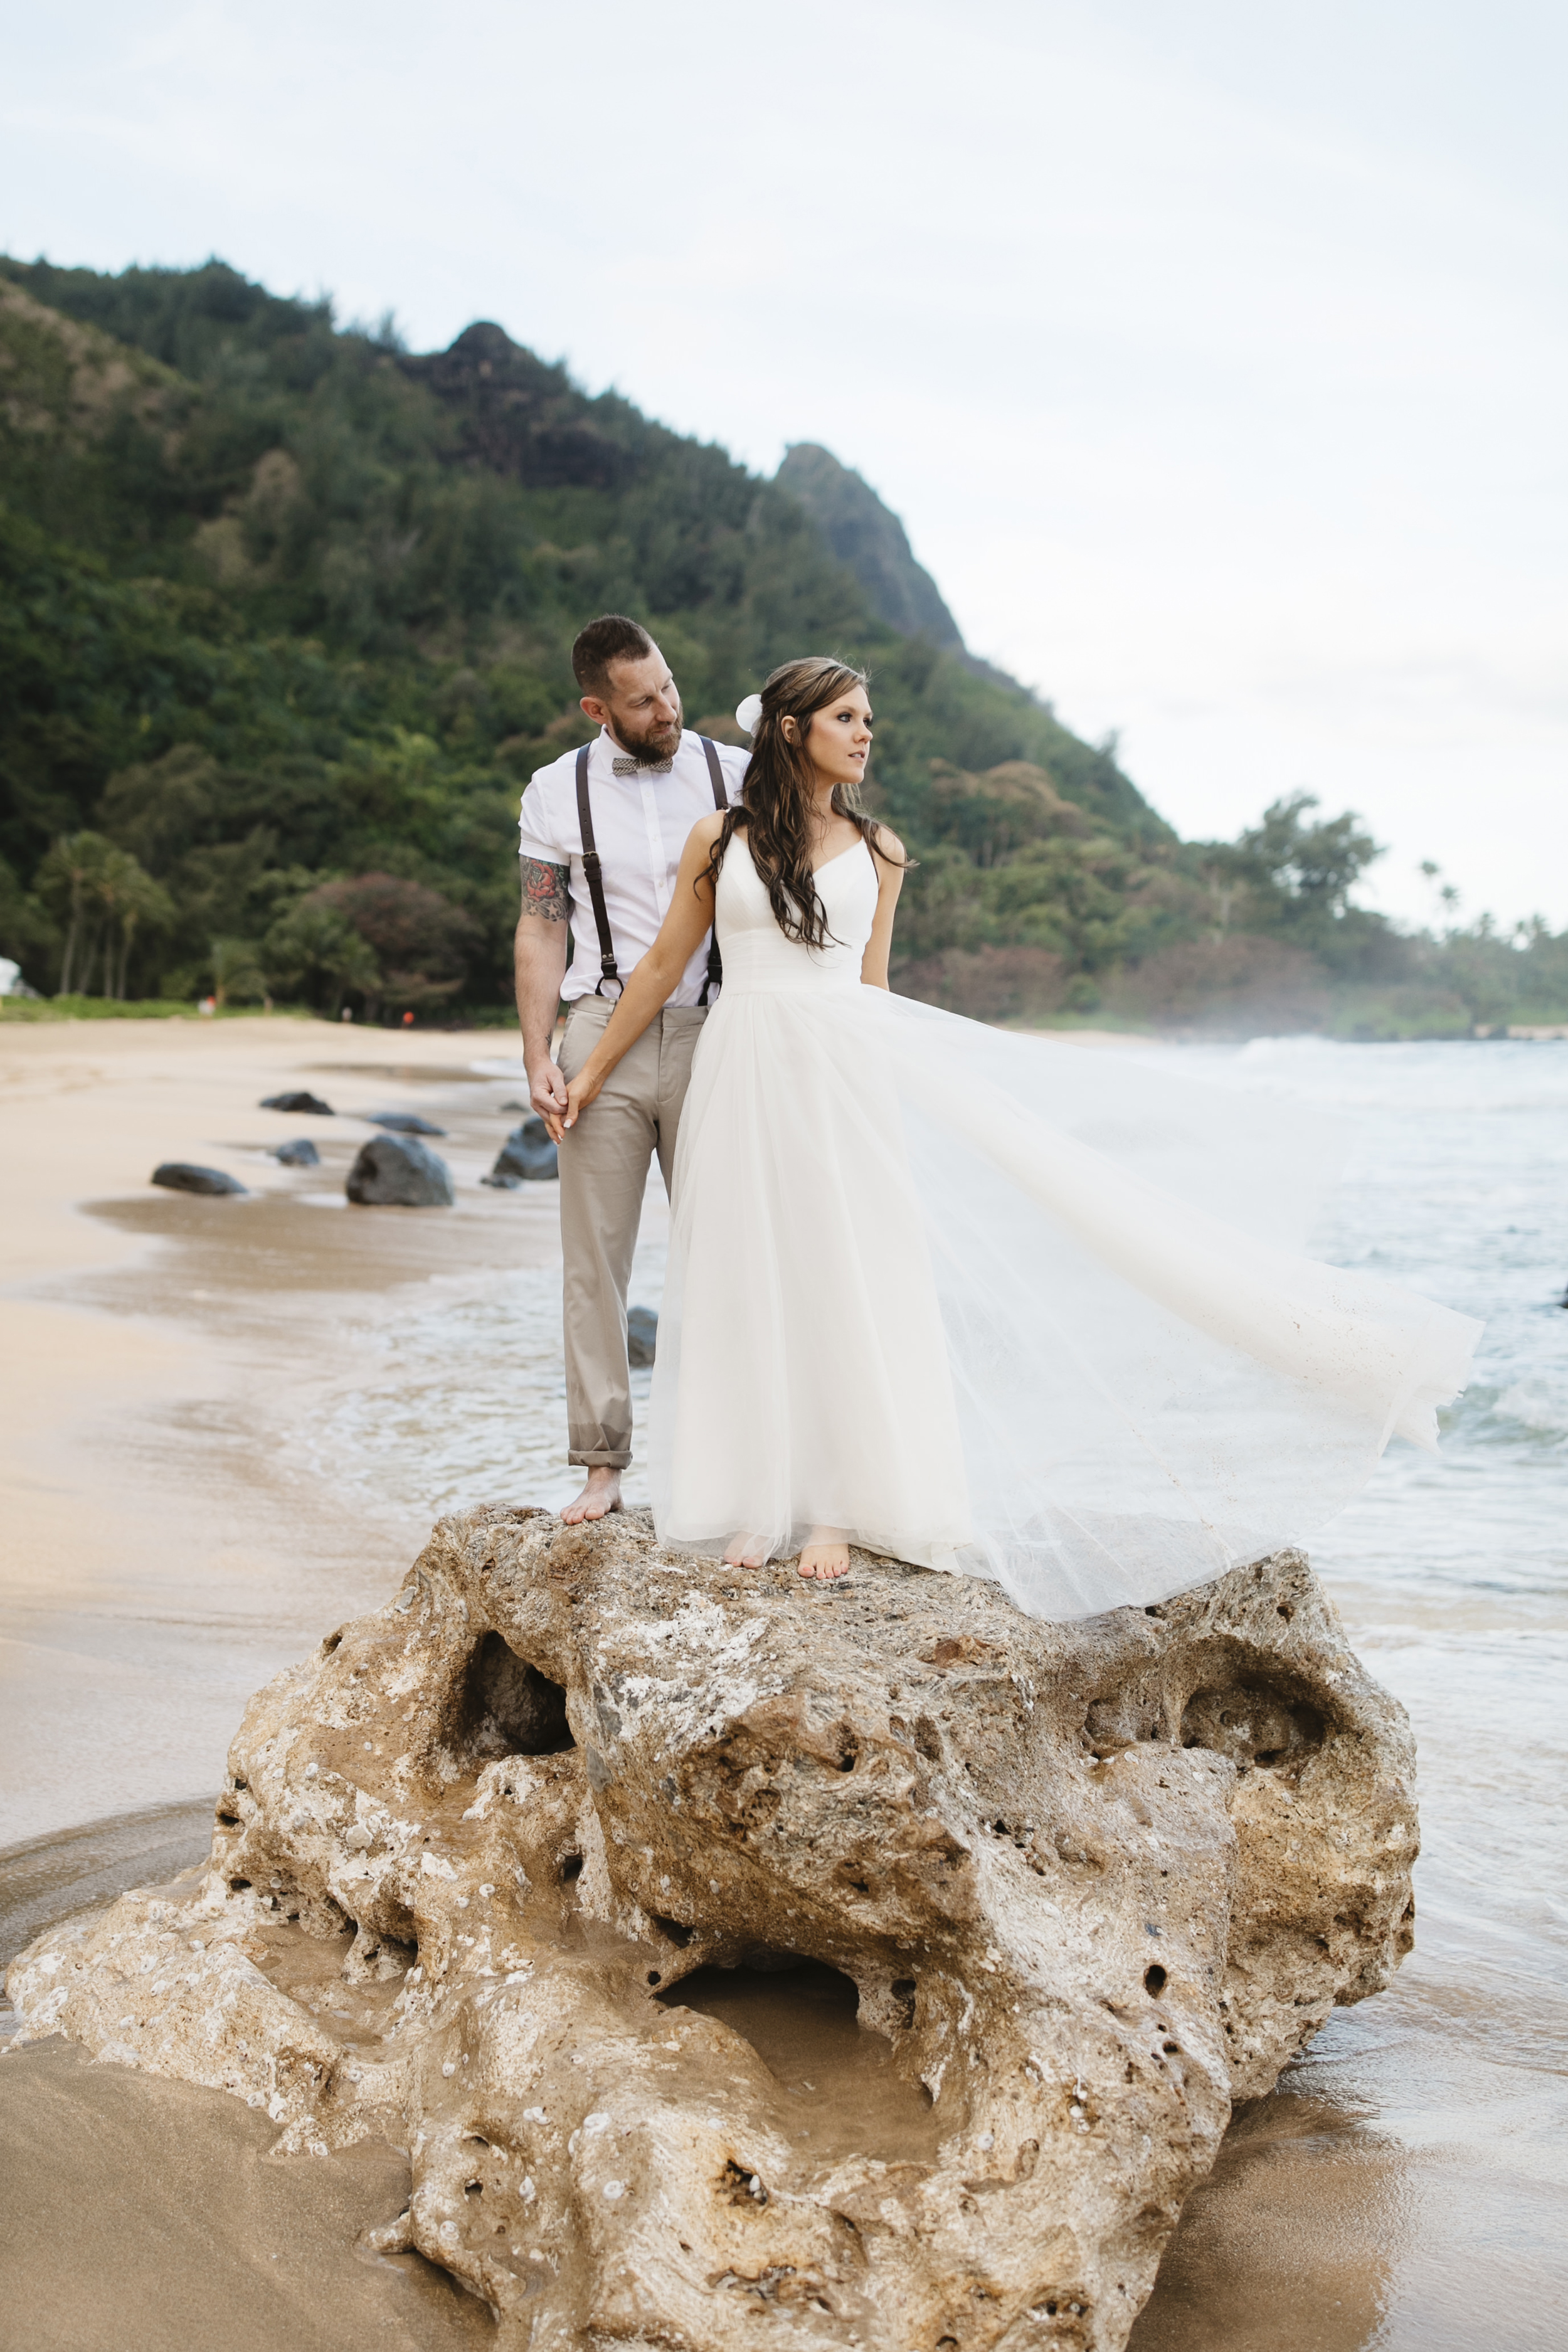 A bride and groom after their Tunnels beach wedding ceremony with Kauai Elopement Photographers Colby and Jess